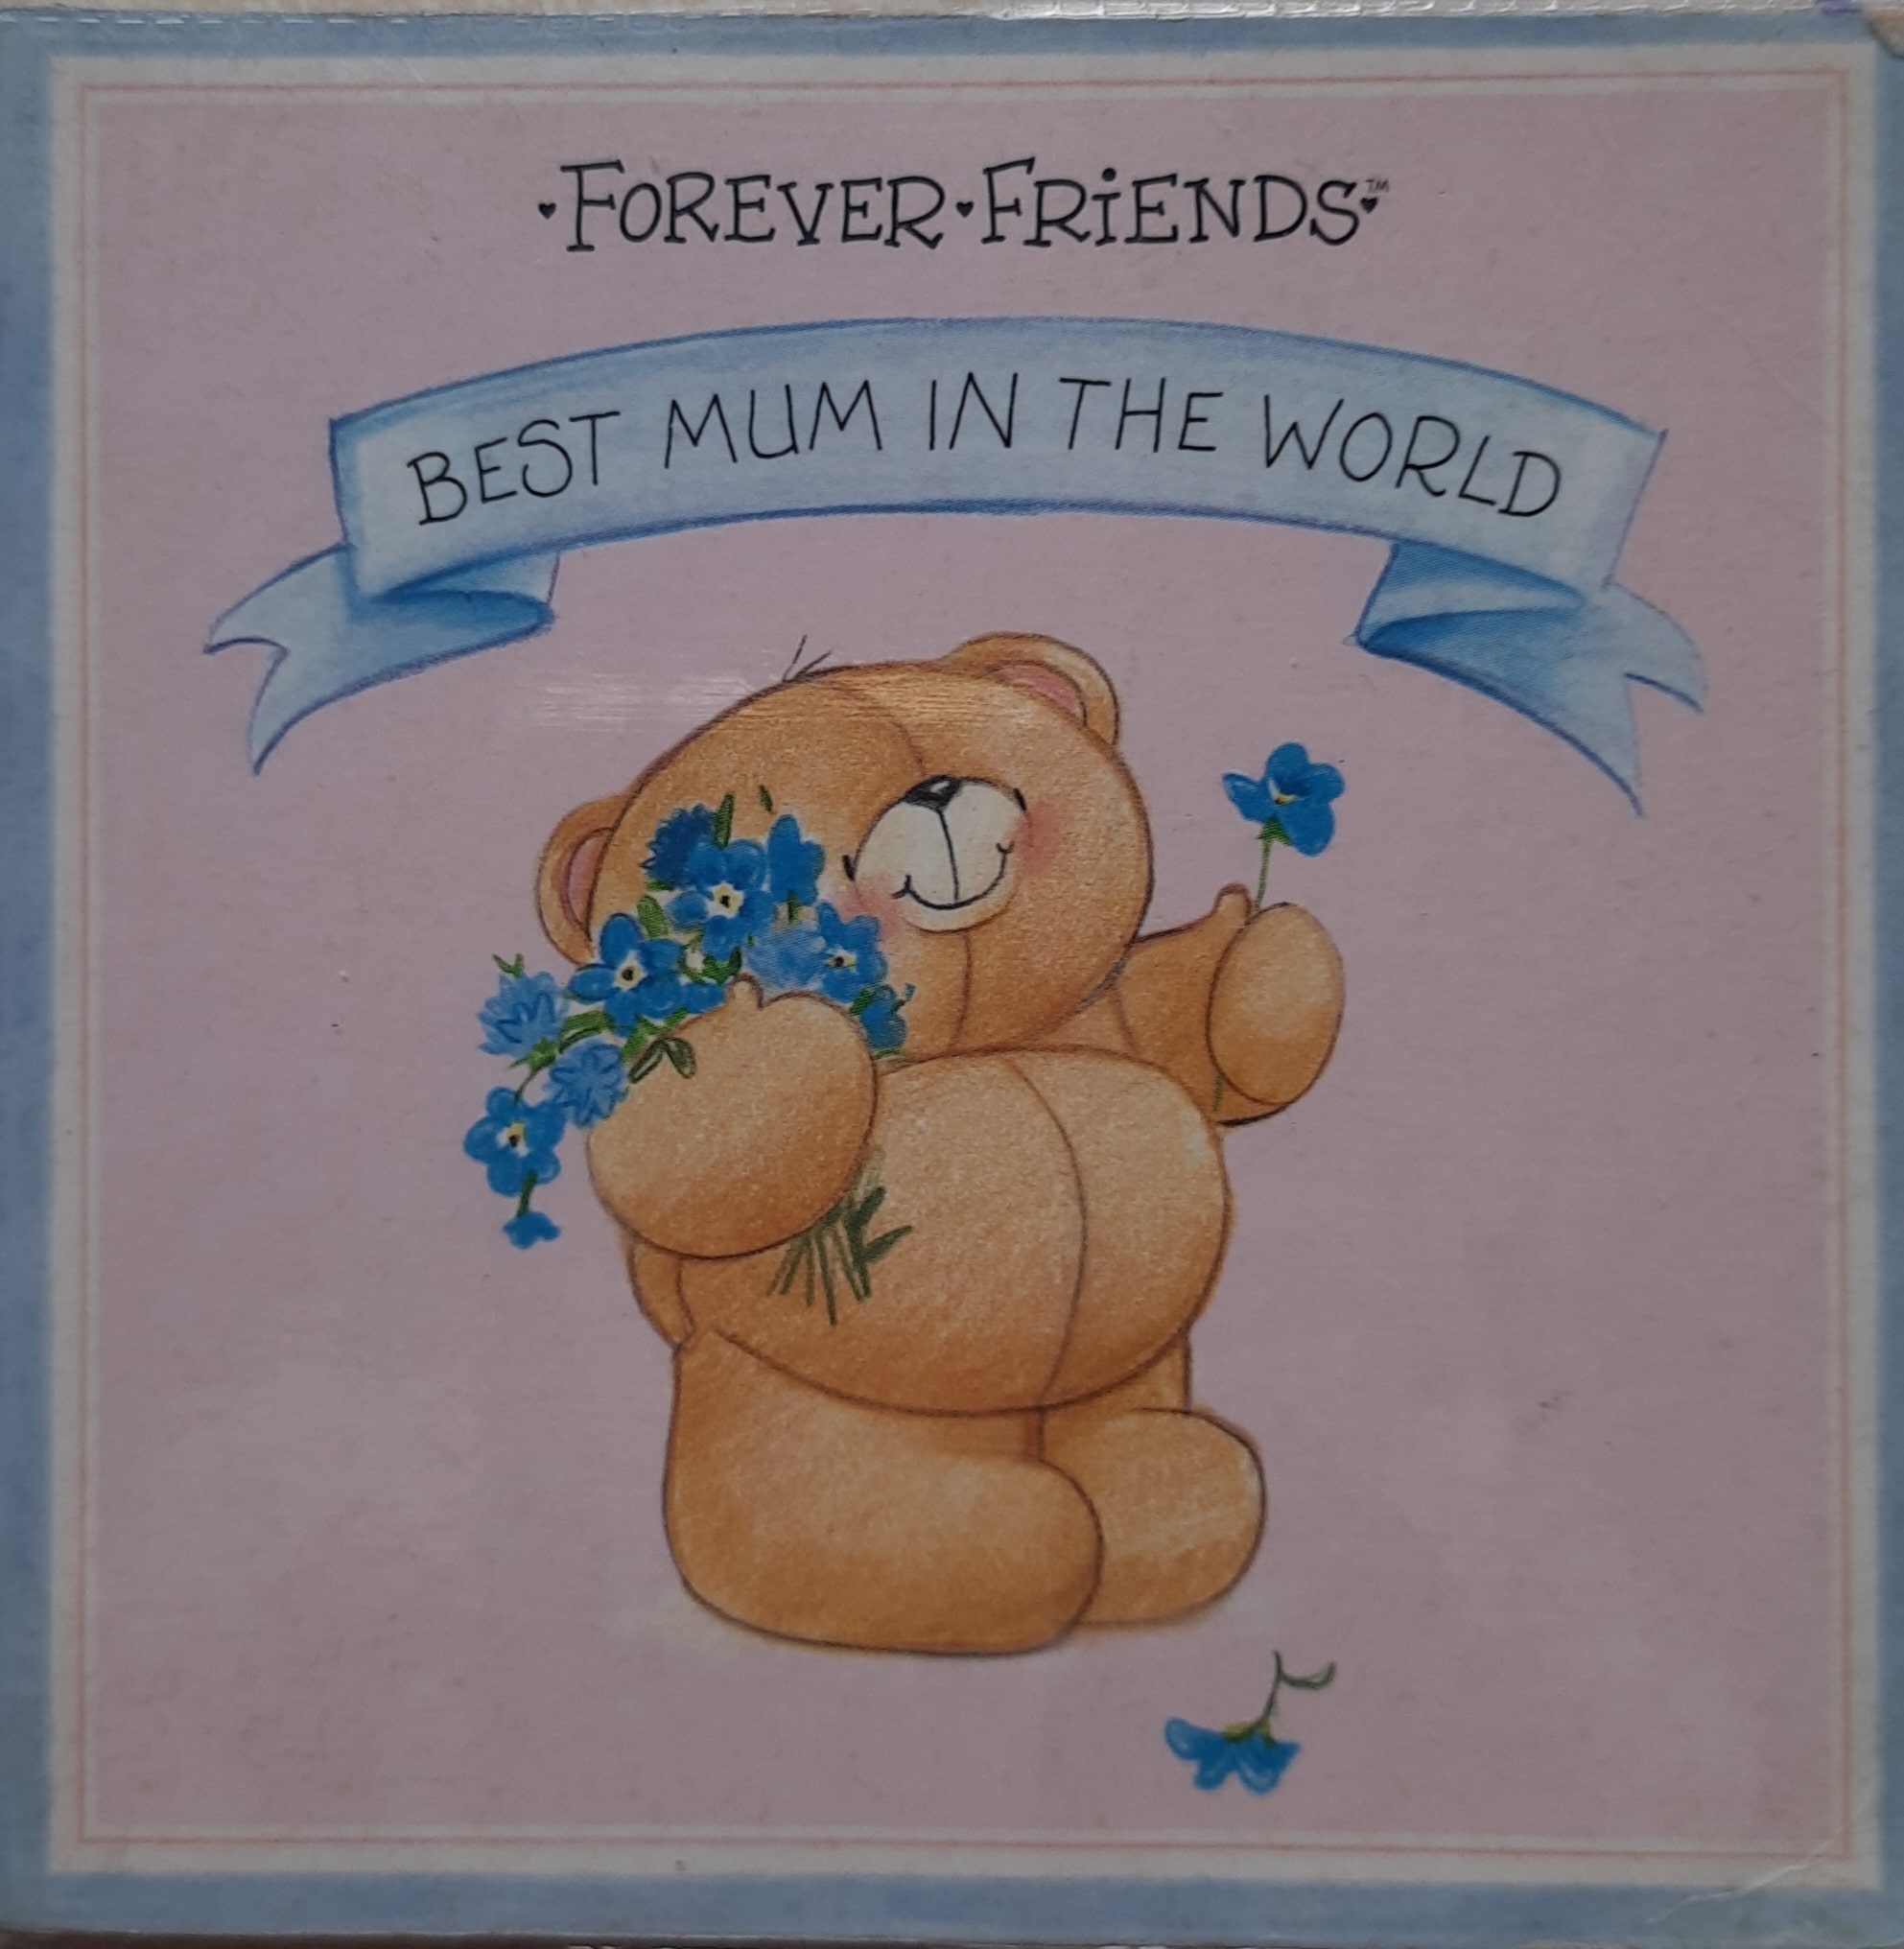 IMG : Forever Friends- Best Mum in the world